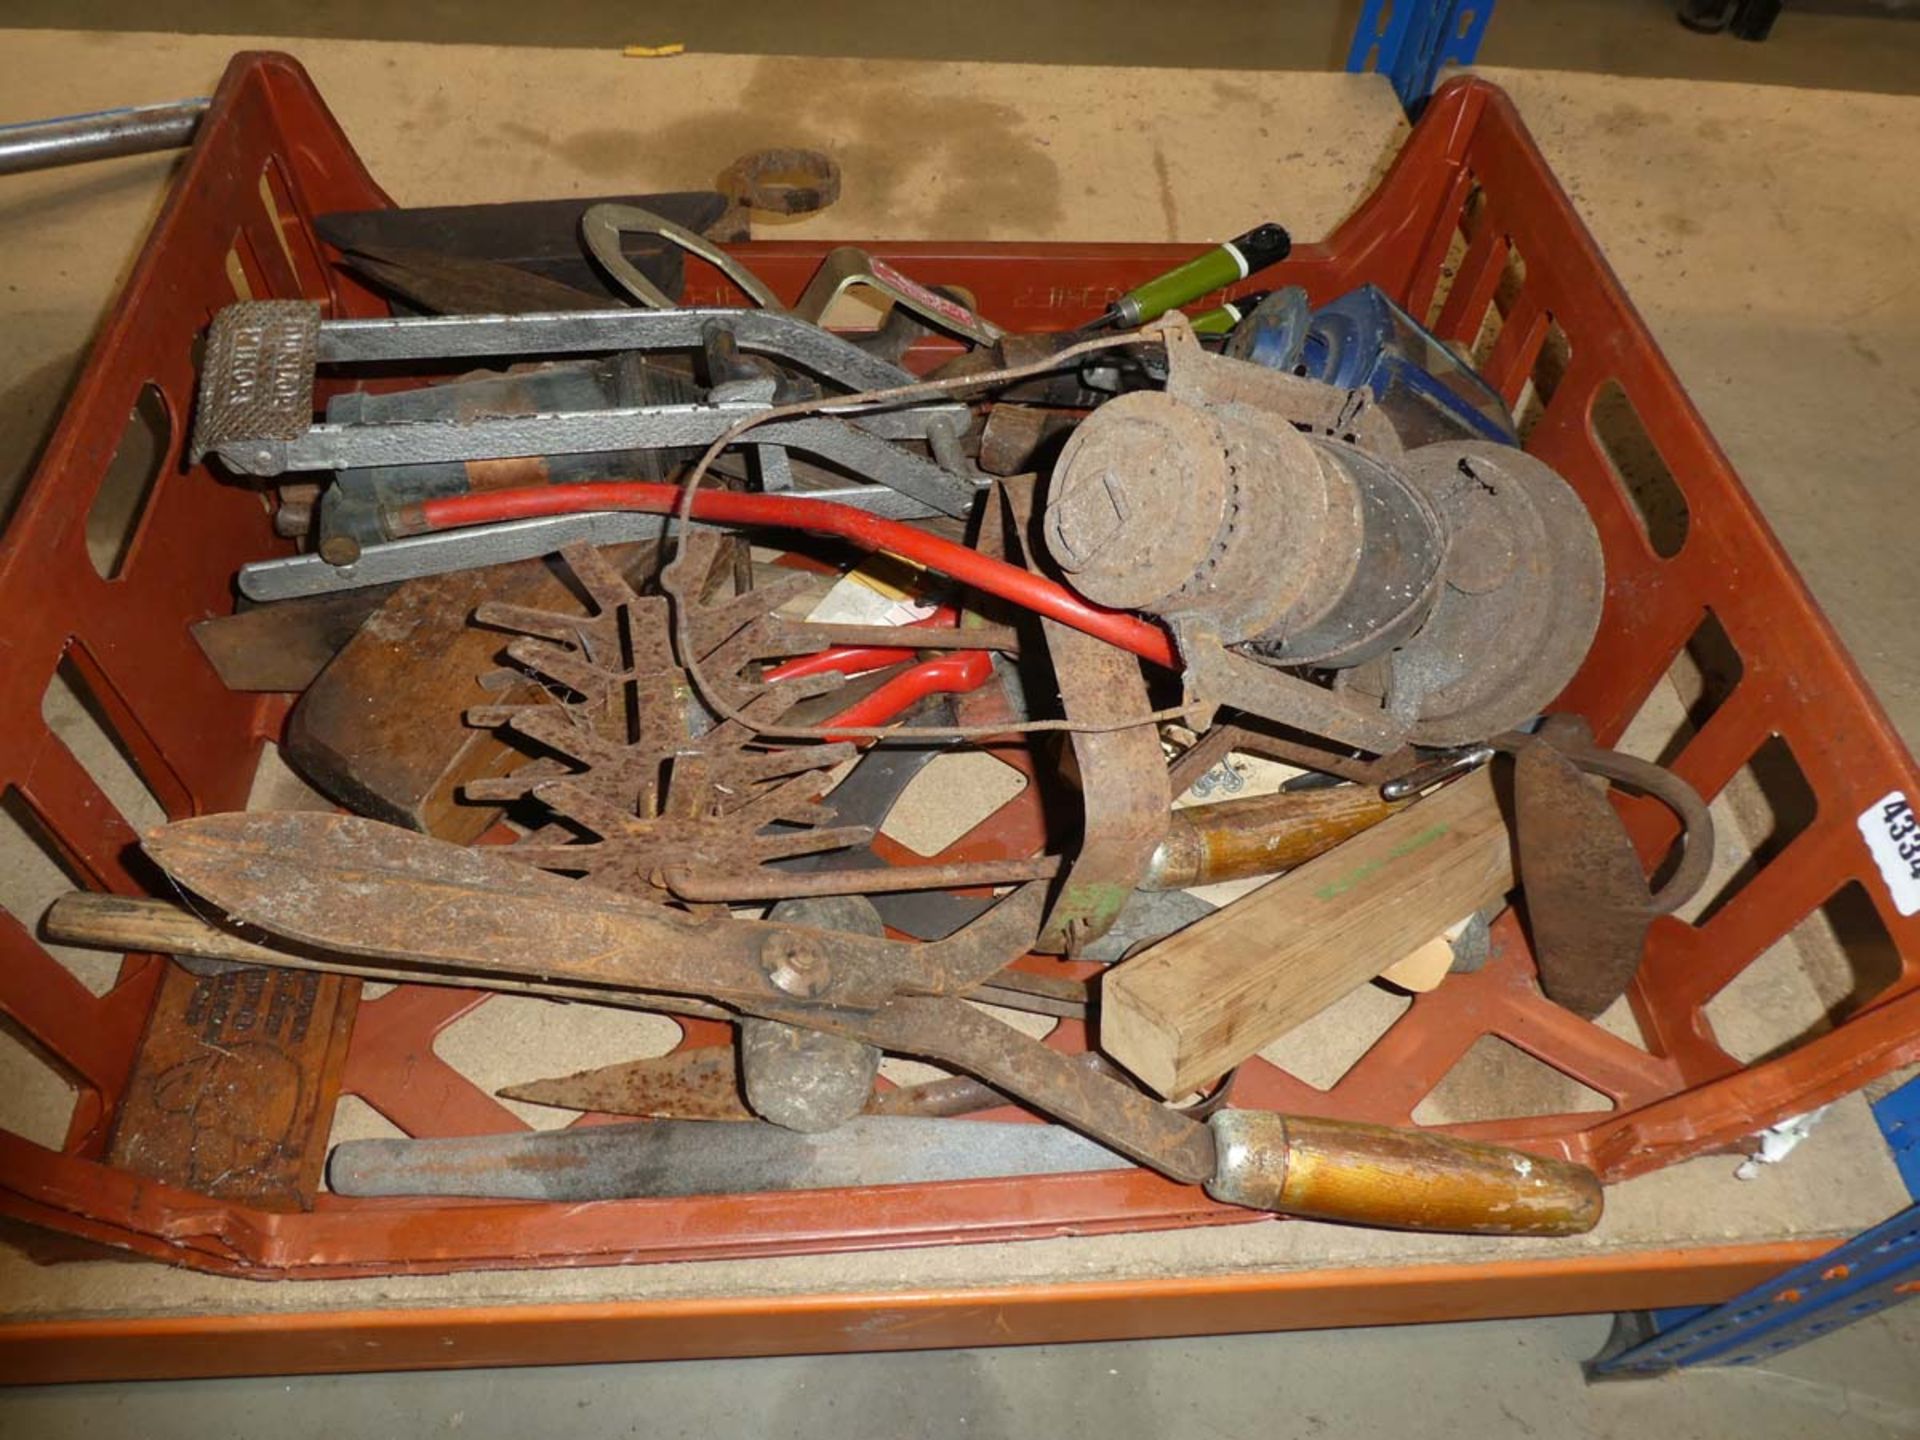 Crate of vintage tools, lamps, foot pumps etc.